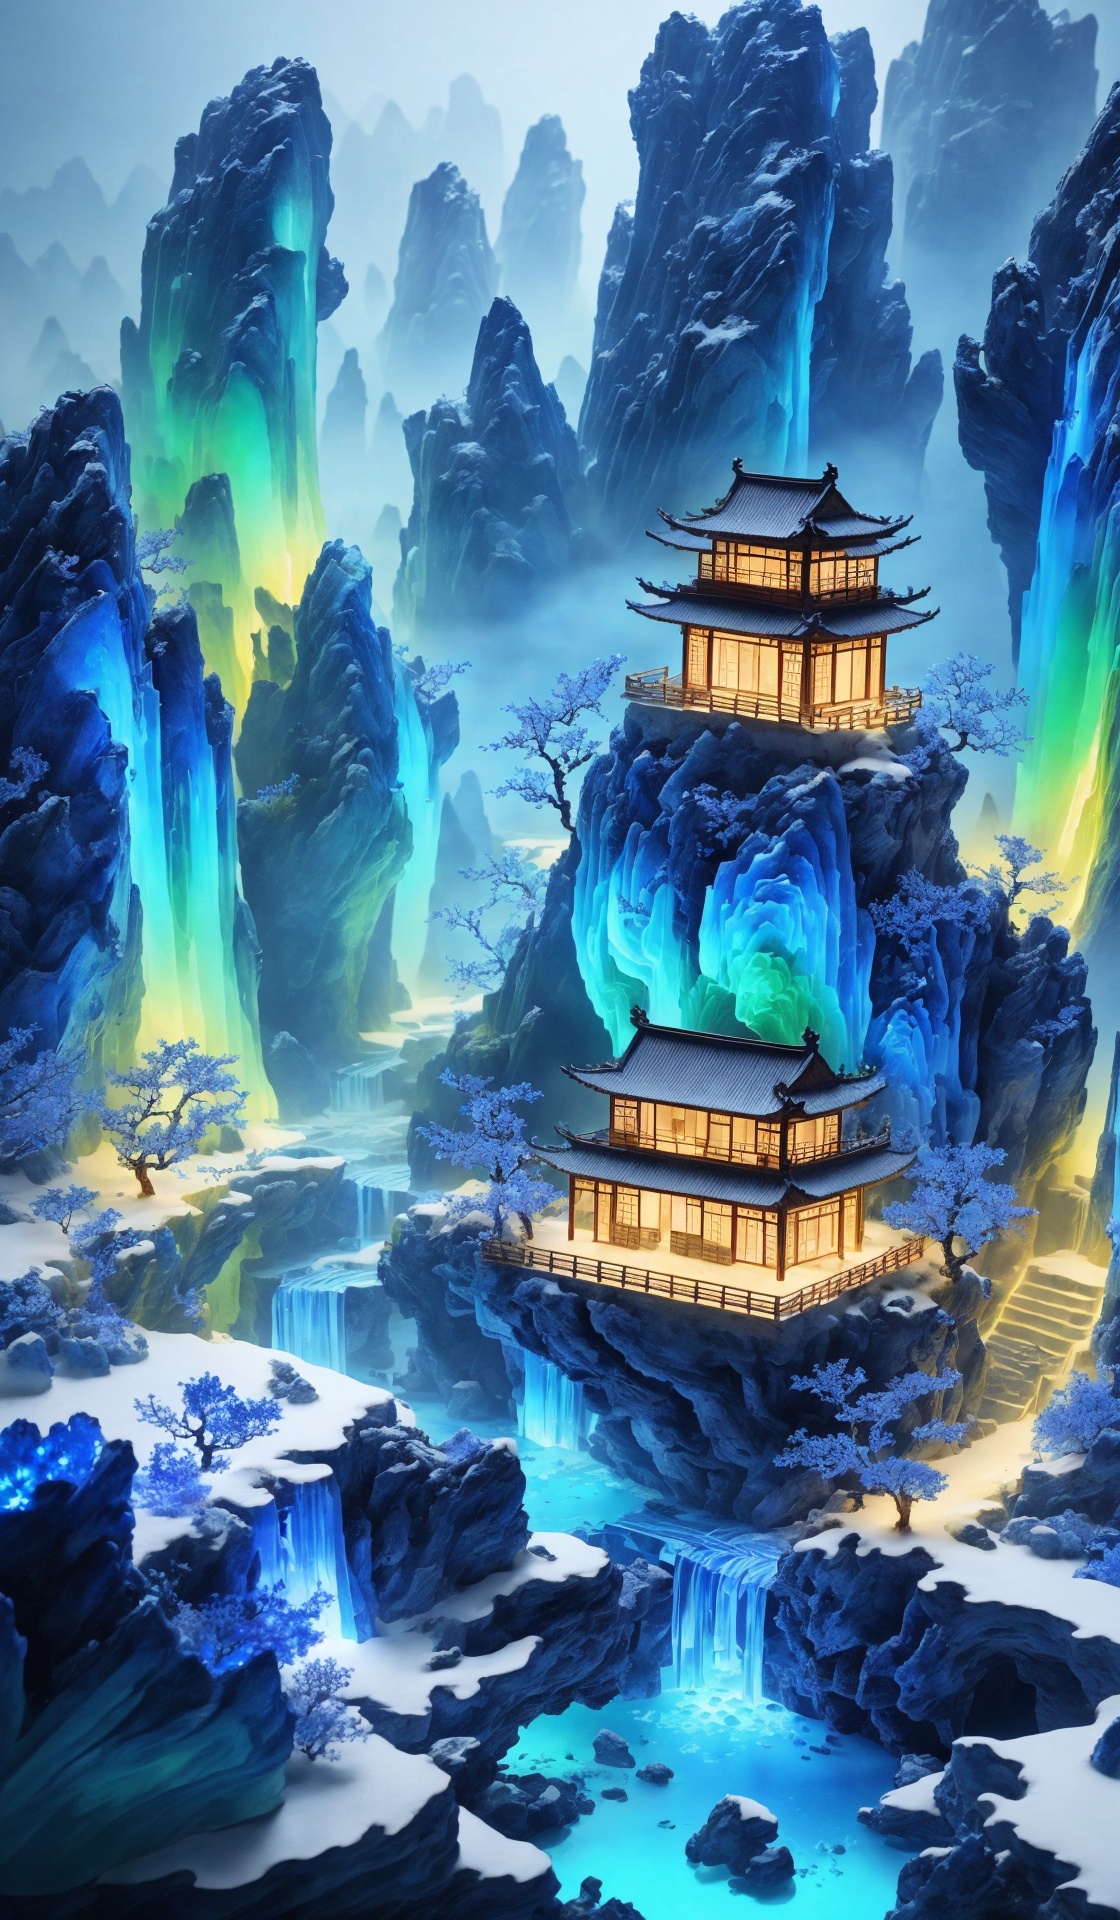 Micro landscape, Chinese three-dimensional landscape painting, Zen aesthetics, Zen composition, Chinese architectural complex, blue copper mine, peacock green, flowing particles, macro lens, rich light, glowing mountains, high mountains, clouds, minimalism, ultimate details, unparalleled details, electric effects, realism, 3D rendering, fine details